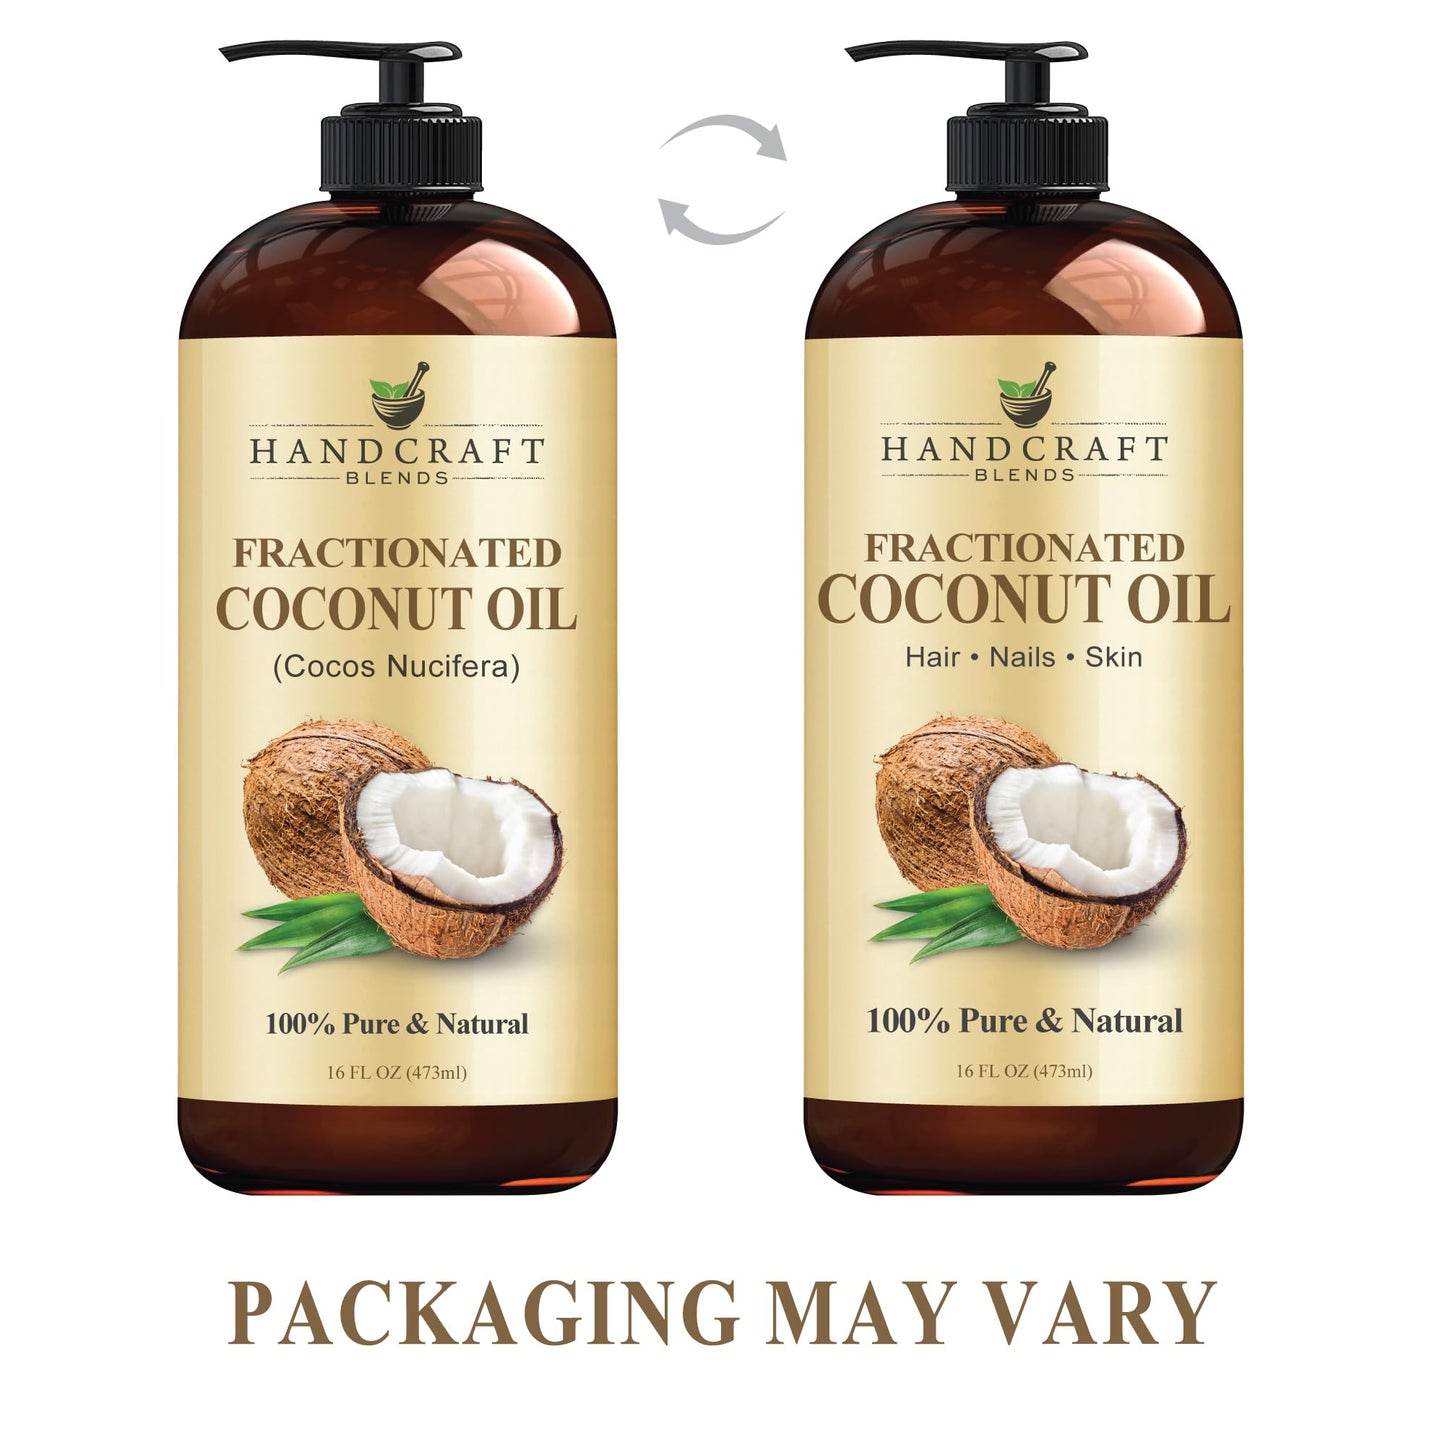 Handcraft Blends Fractionated Coconut Oil - 16 Fl Oz - 100% Pure and Natural - Premium Grade Oil for Skin and Hair - Carrier Oil - Hair and Body Oil - Massage Oil - Hair Tonic